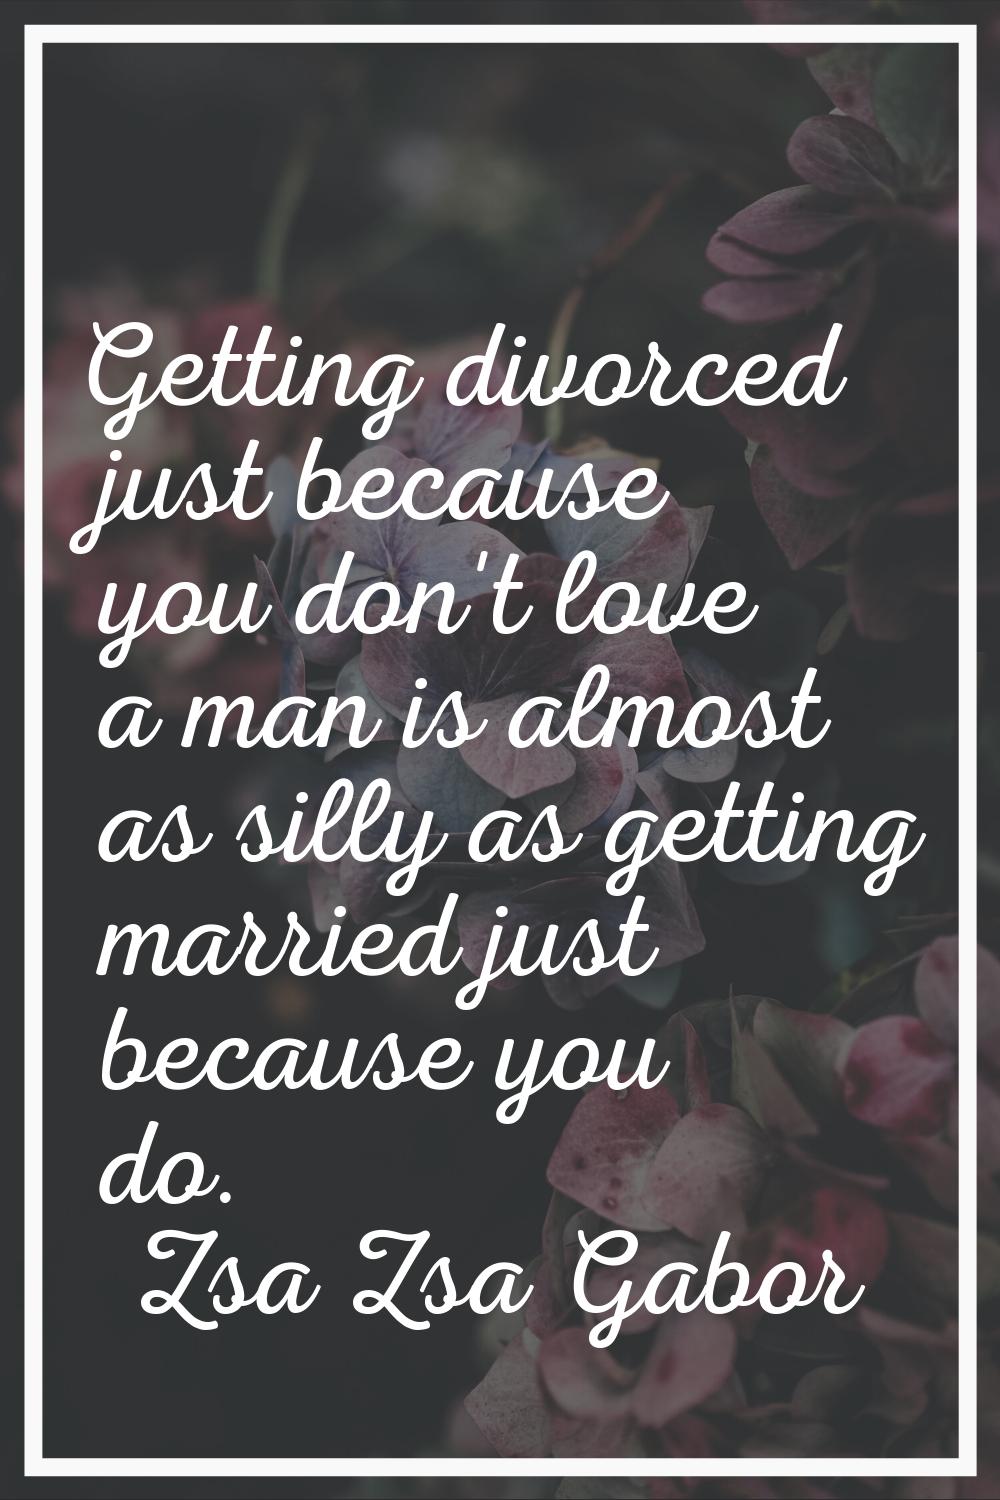 Getting divorced just because you don't love a man is almost as silly as getting married just becau